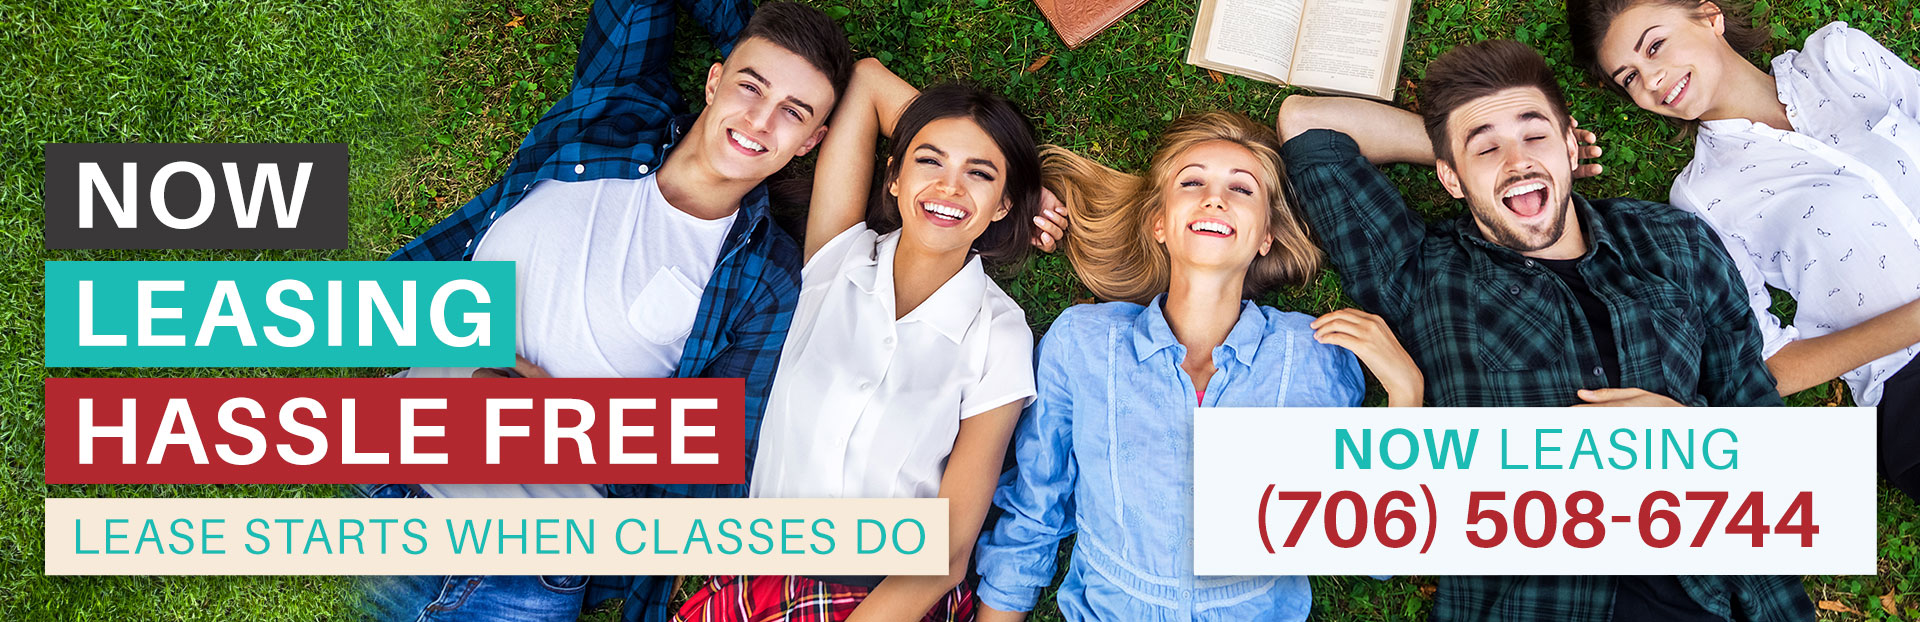 Now Leasing Hassle Free | Lease Starts When Classes Do